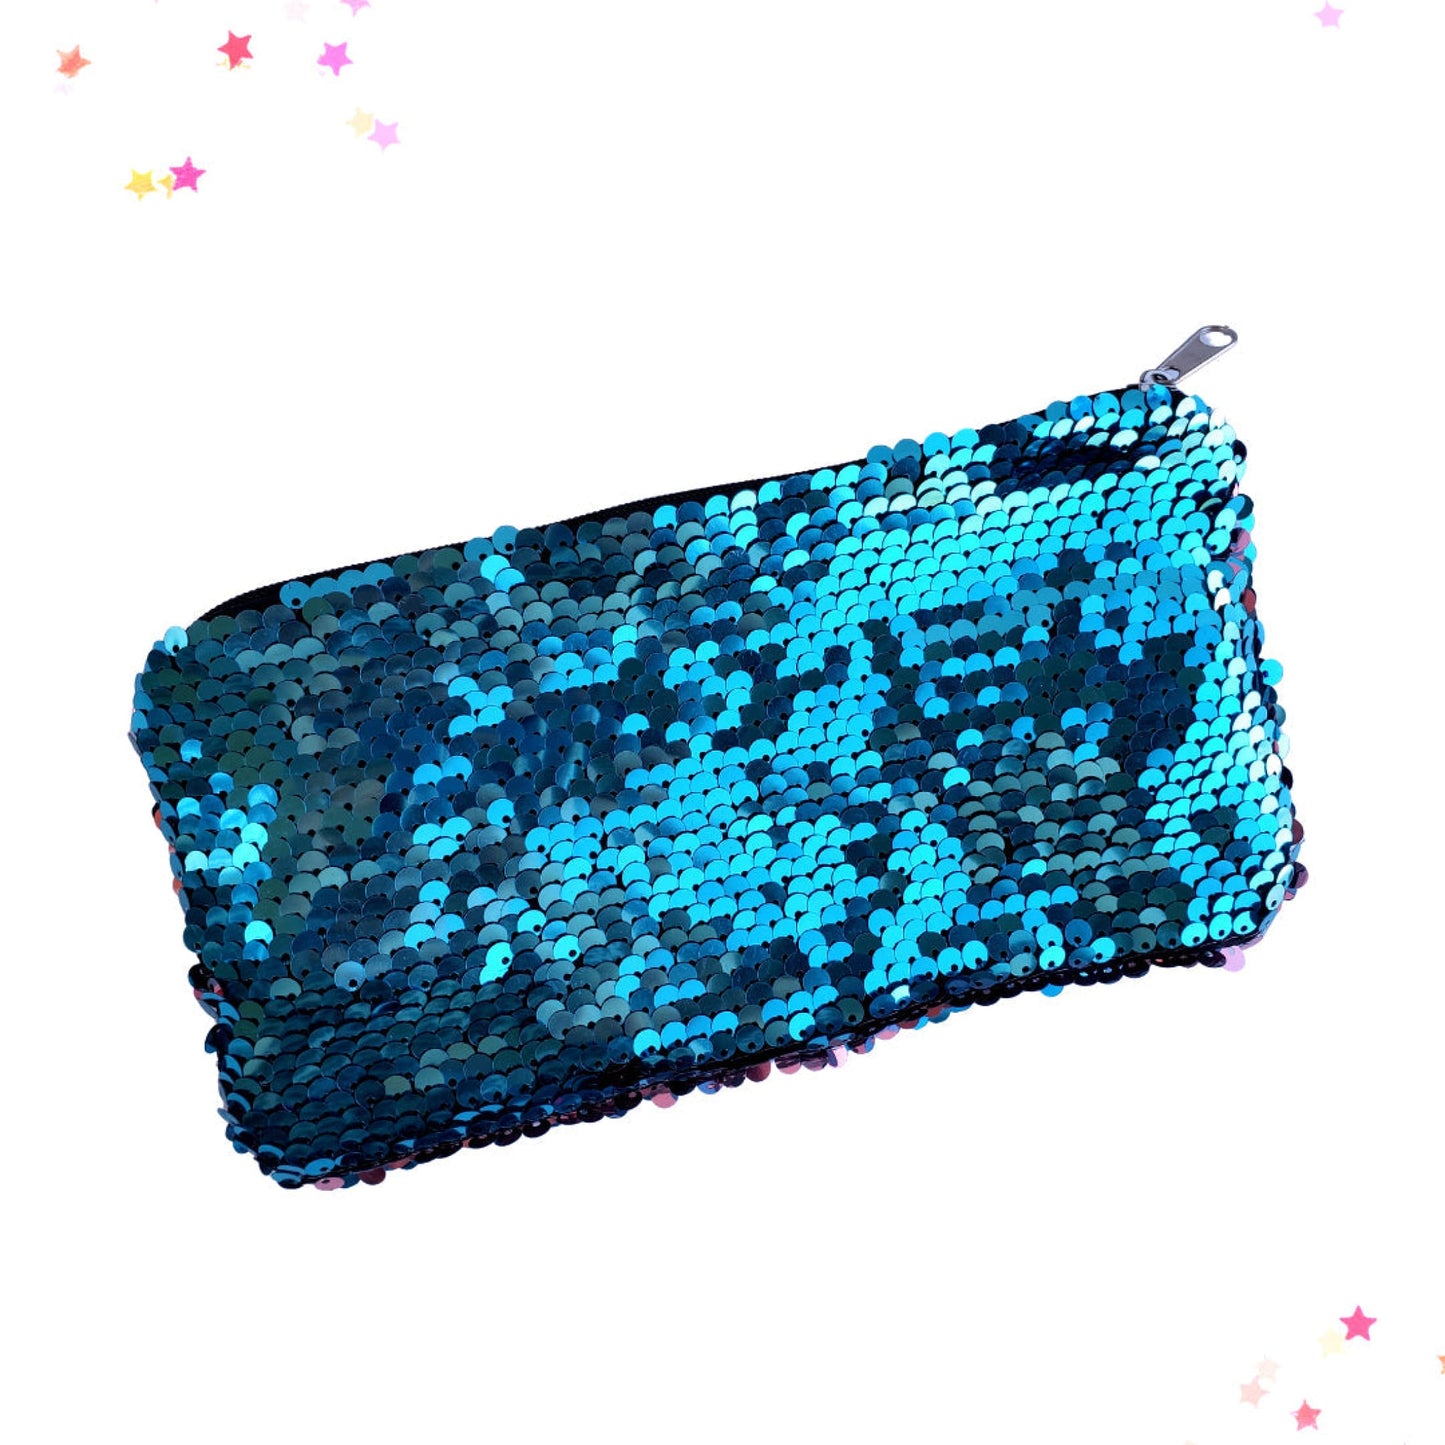 Sequin Pencil Case in Blue and Purple from Confetti Kitty, Only 7.99